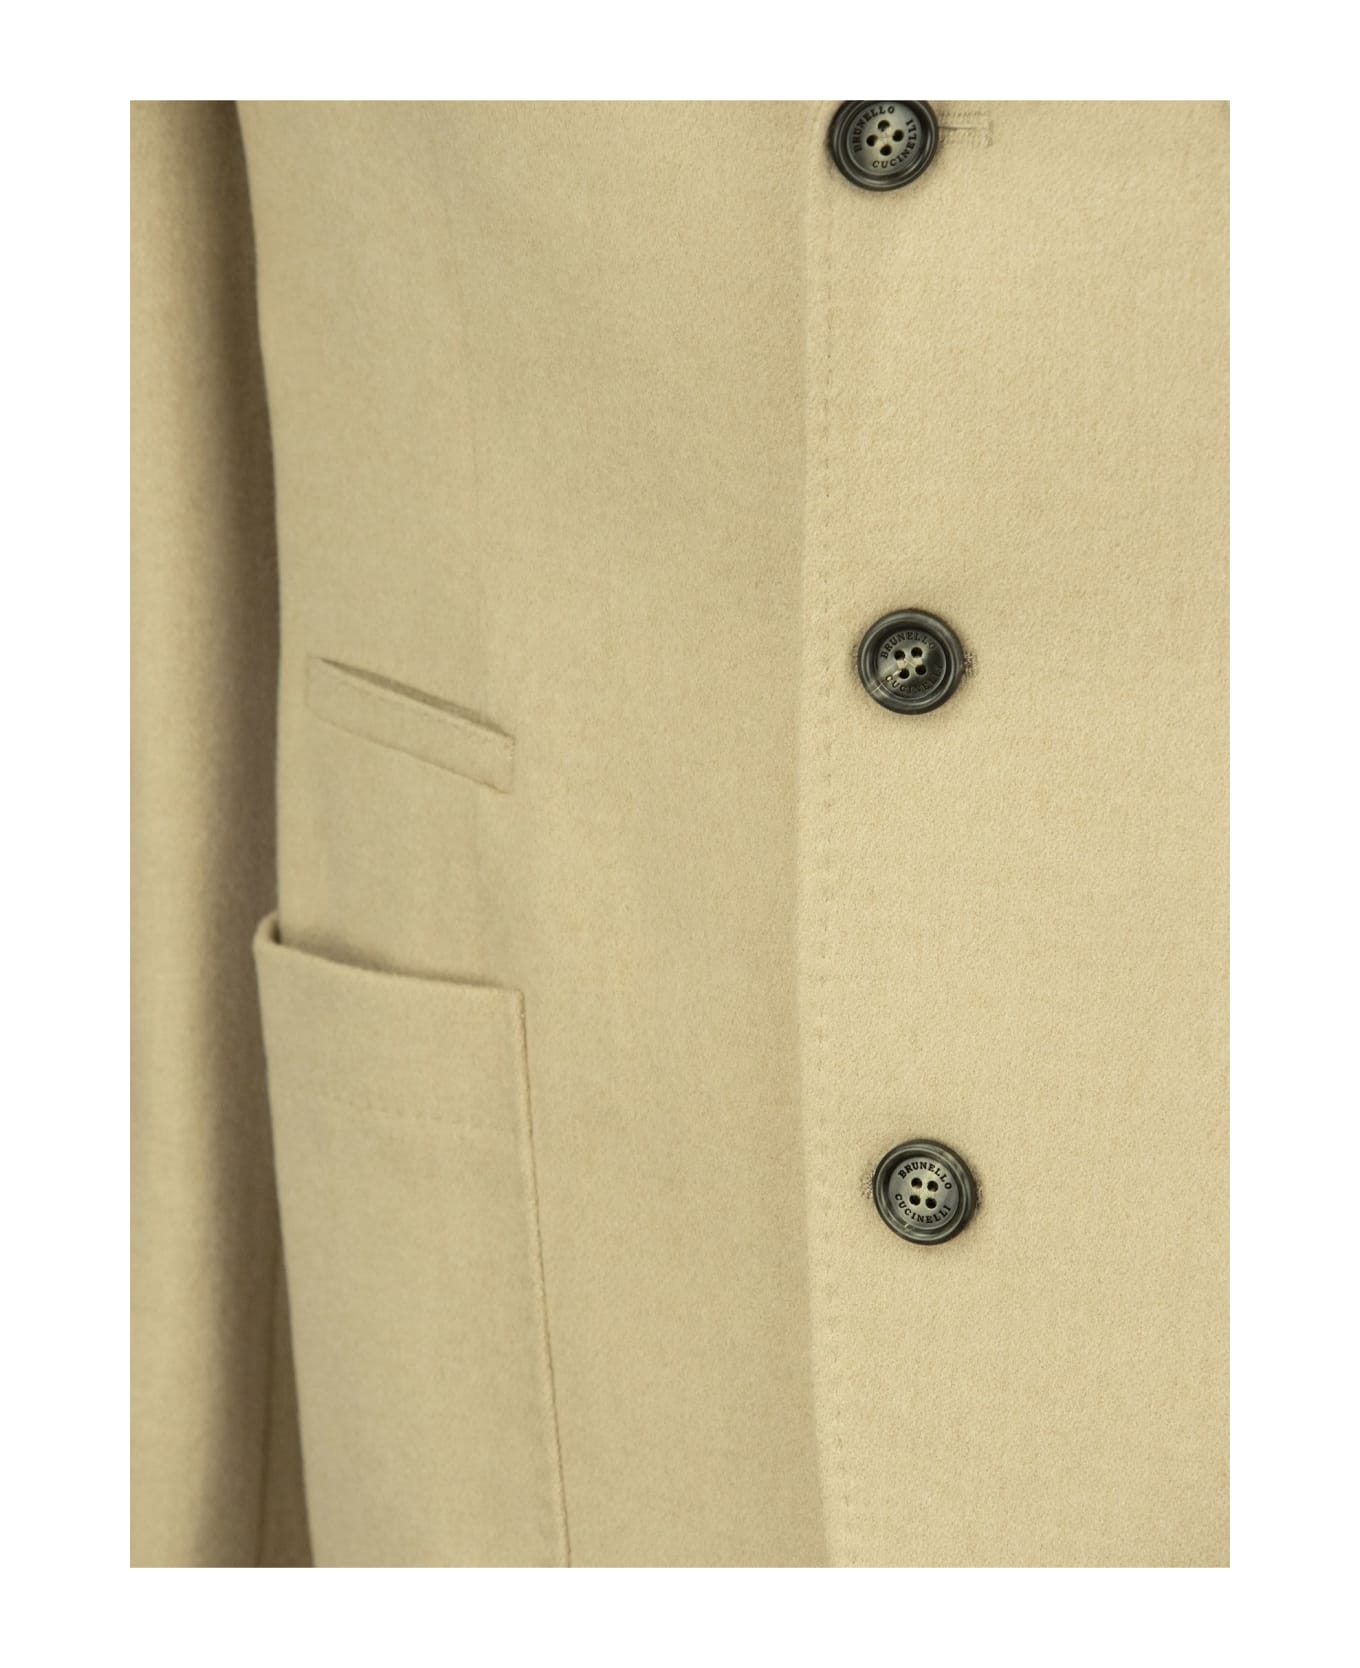 Brunello Cucinelli Camel Jacket With Patch Pockets - Sand